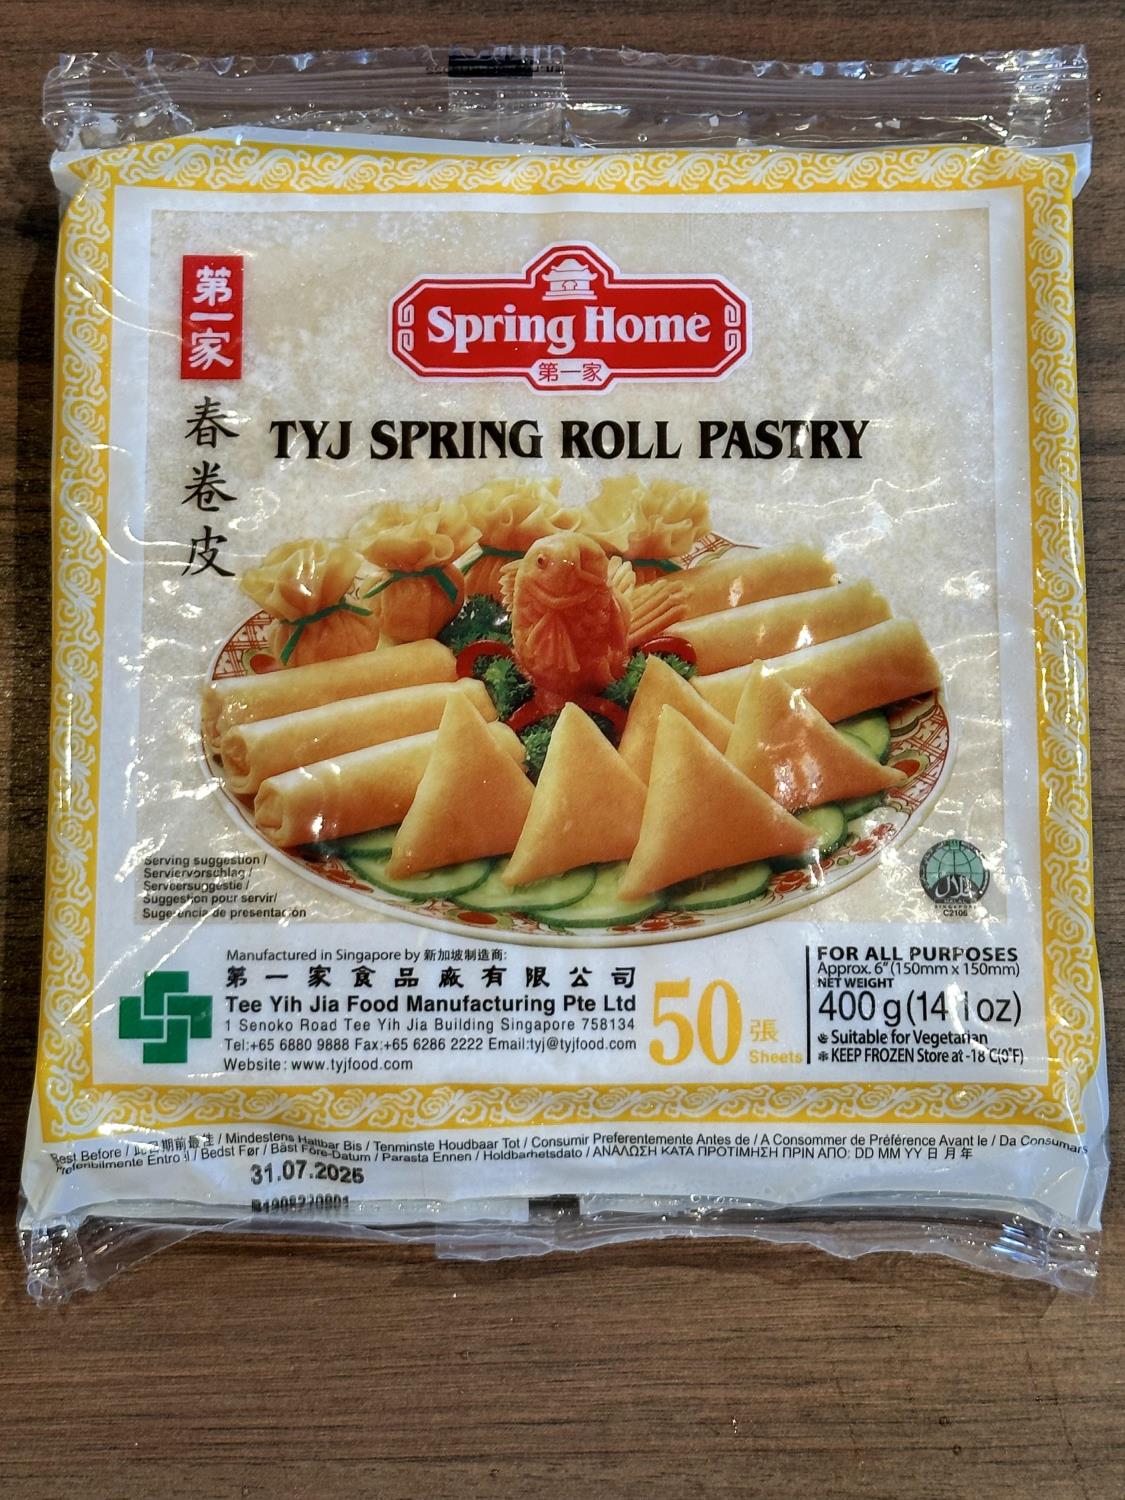 Spring Home TYJ Spring Roll Pastry 6 (50 Sheets) - 14.1 oz (400 g